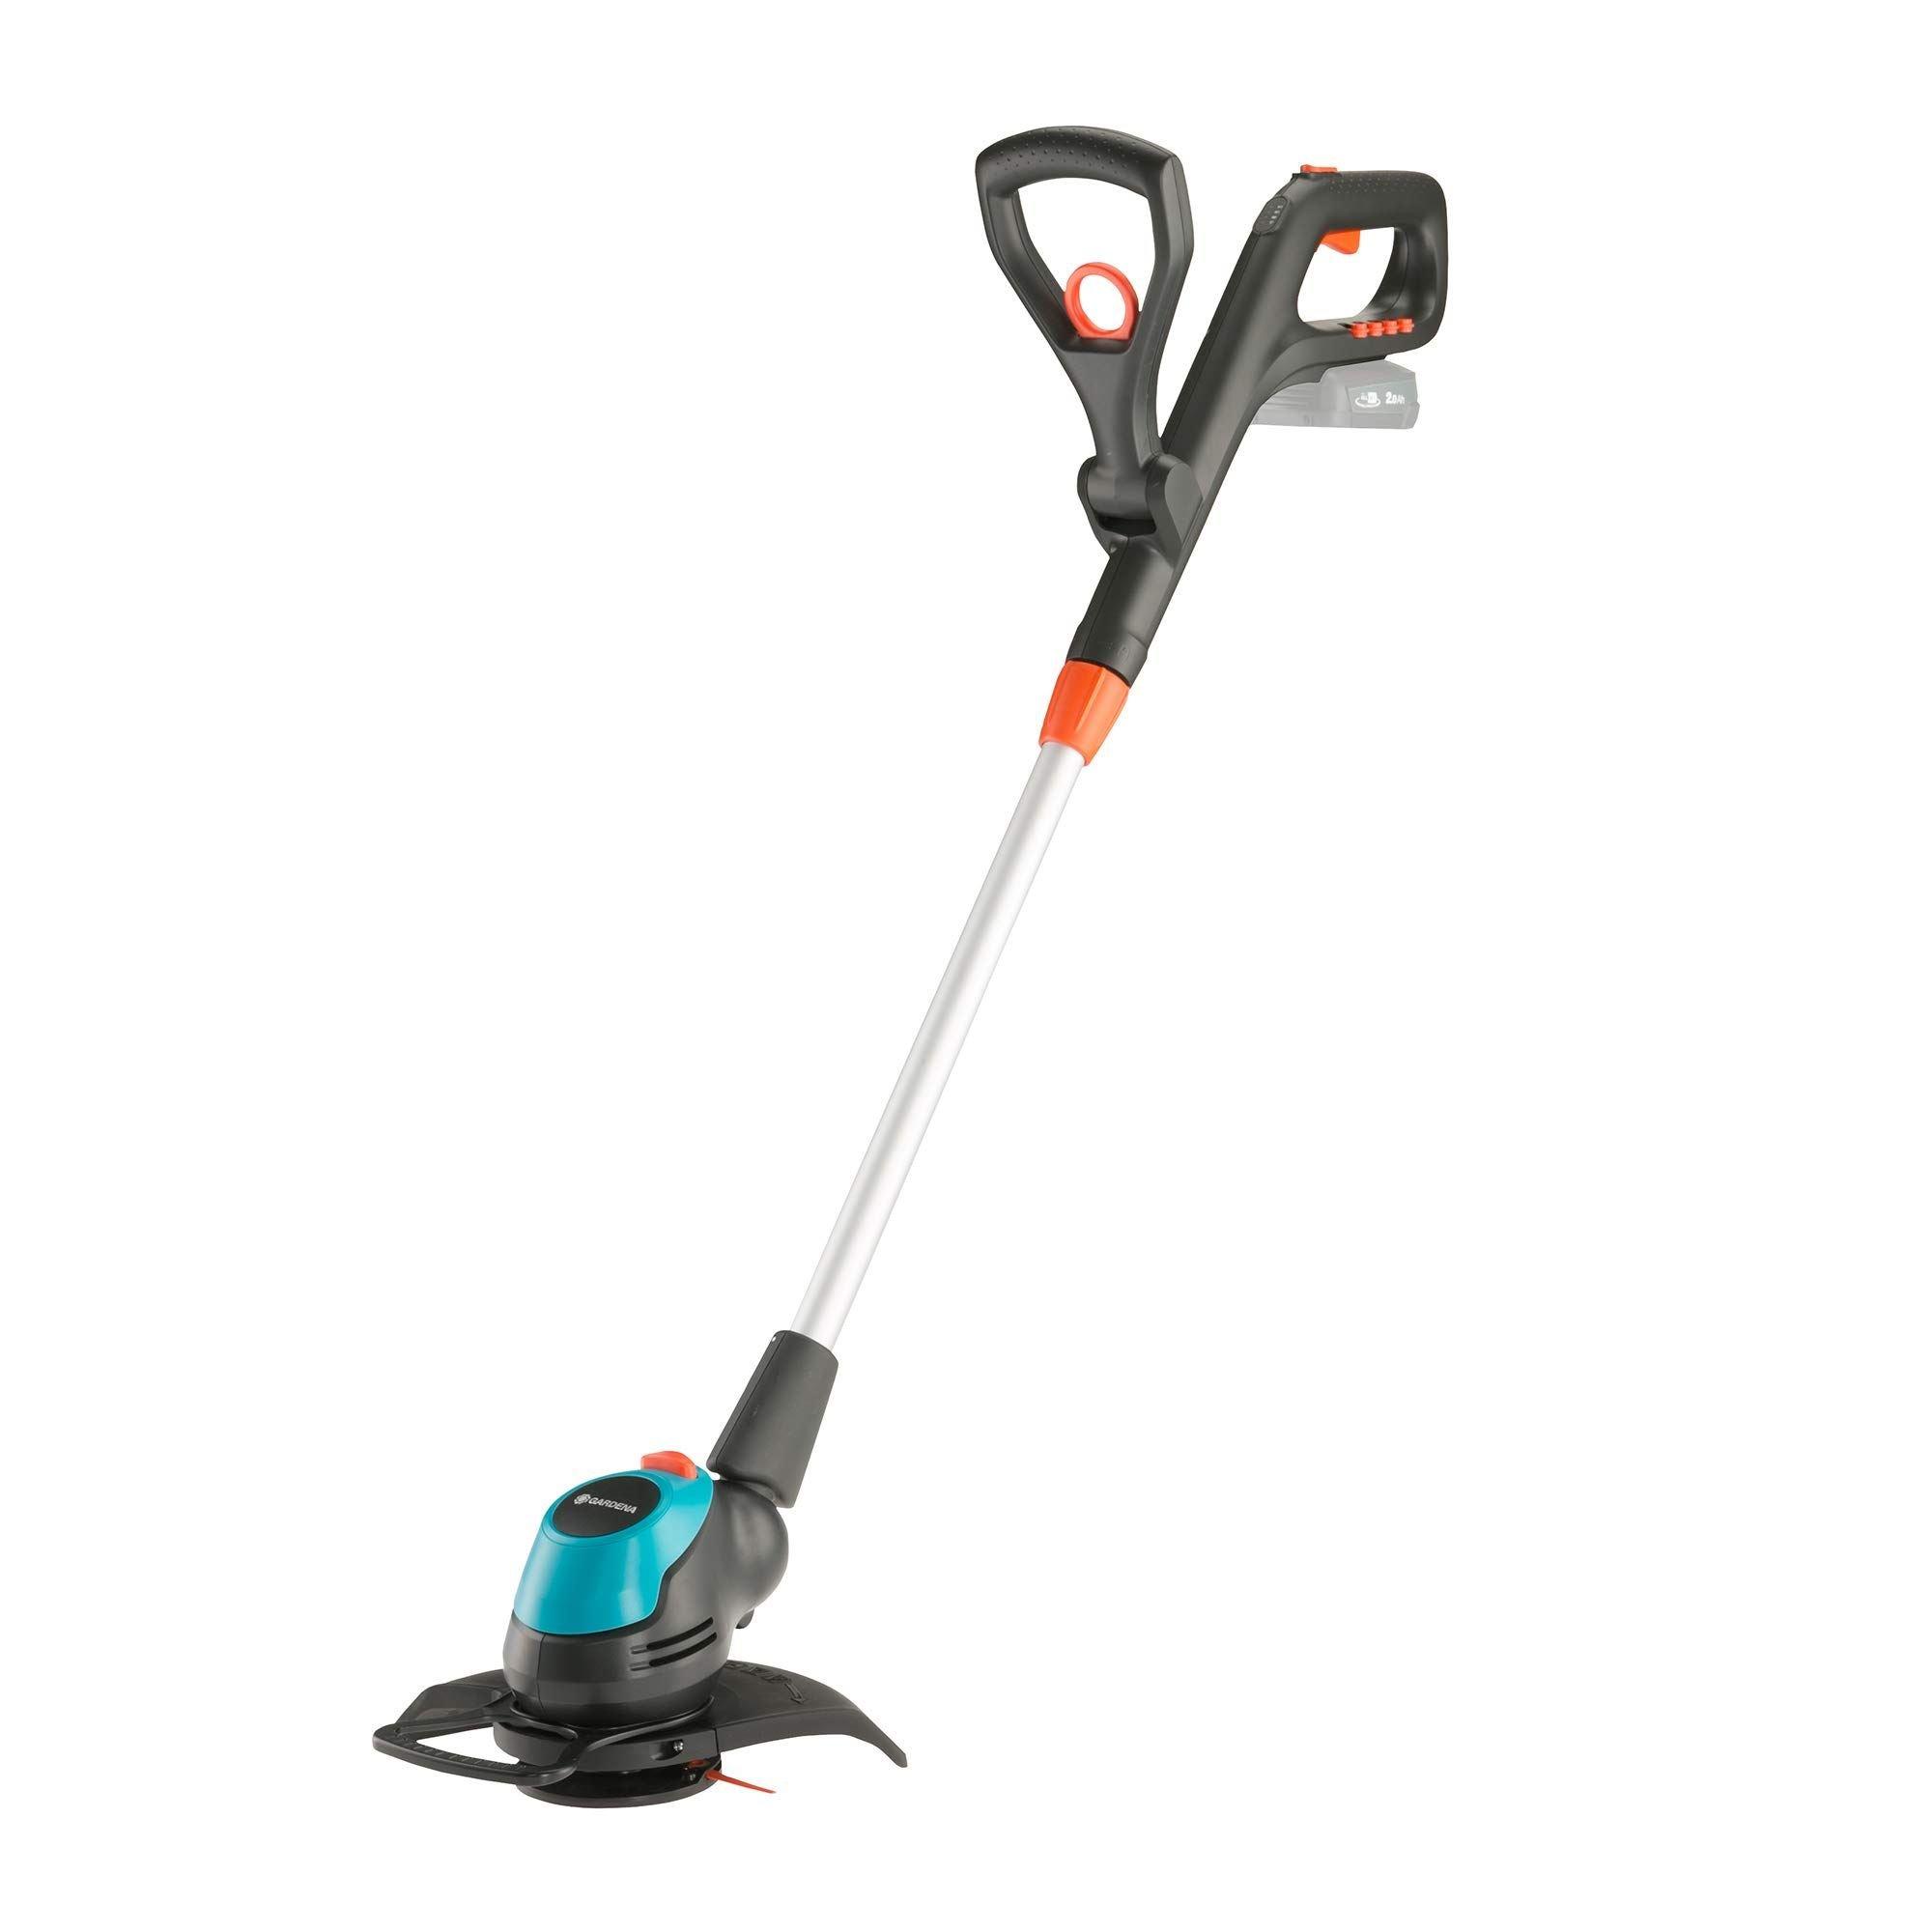 EasyCut 23/18V Grass Trimmer (Without battery)